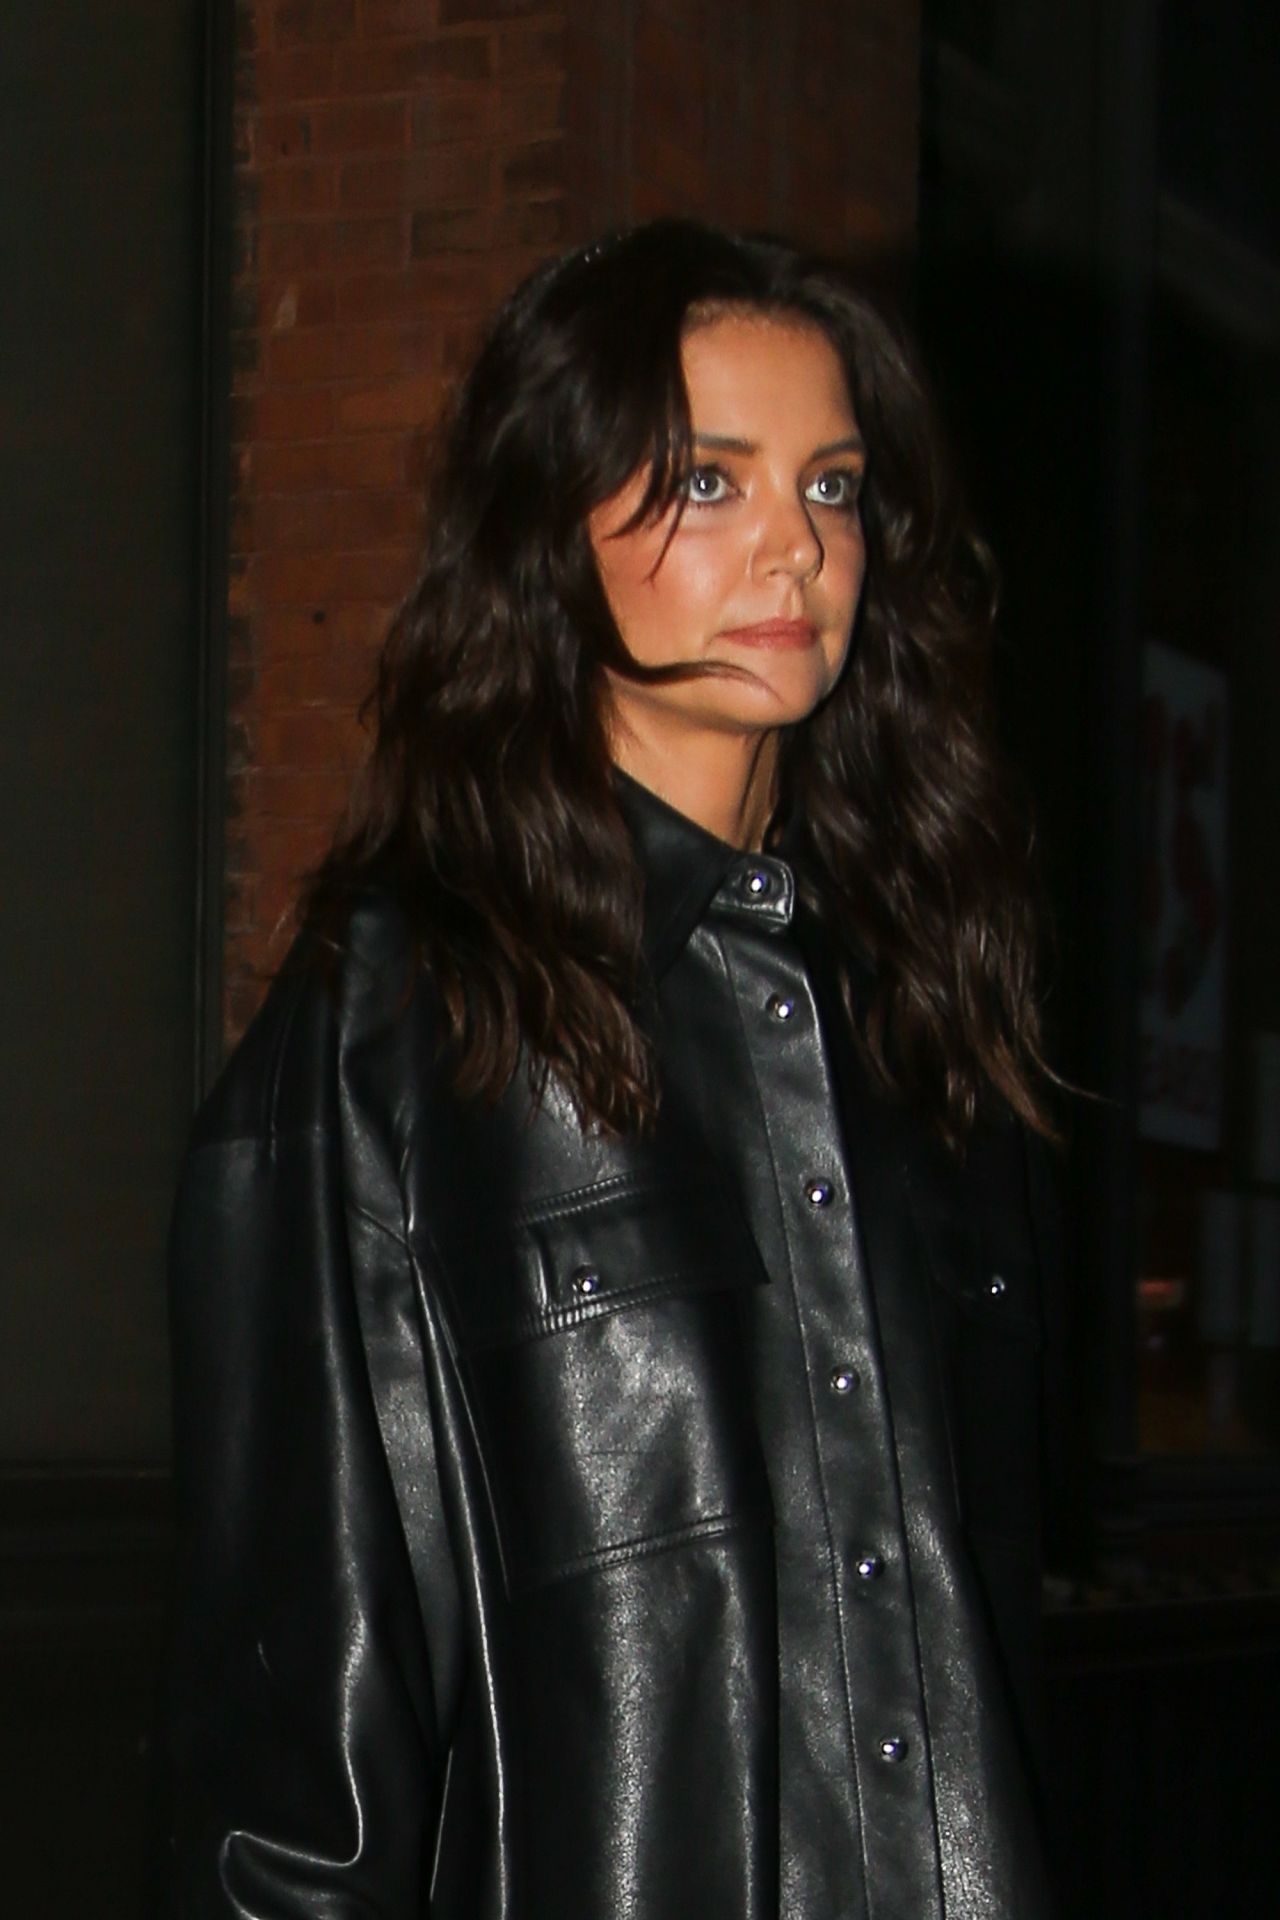 Katie Holmes at the Urth Caffe in Los Angeles June 8, 2011 – Star Style